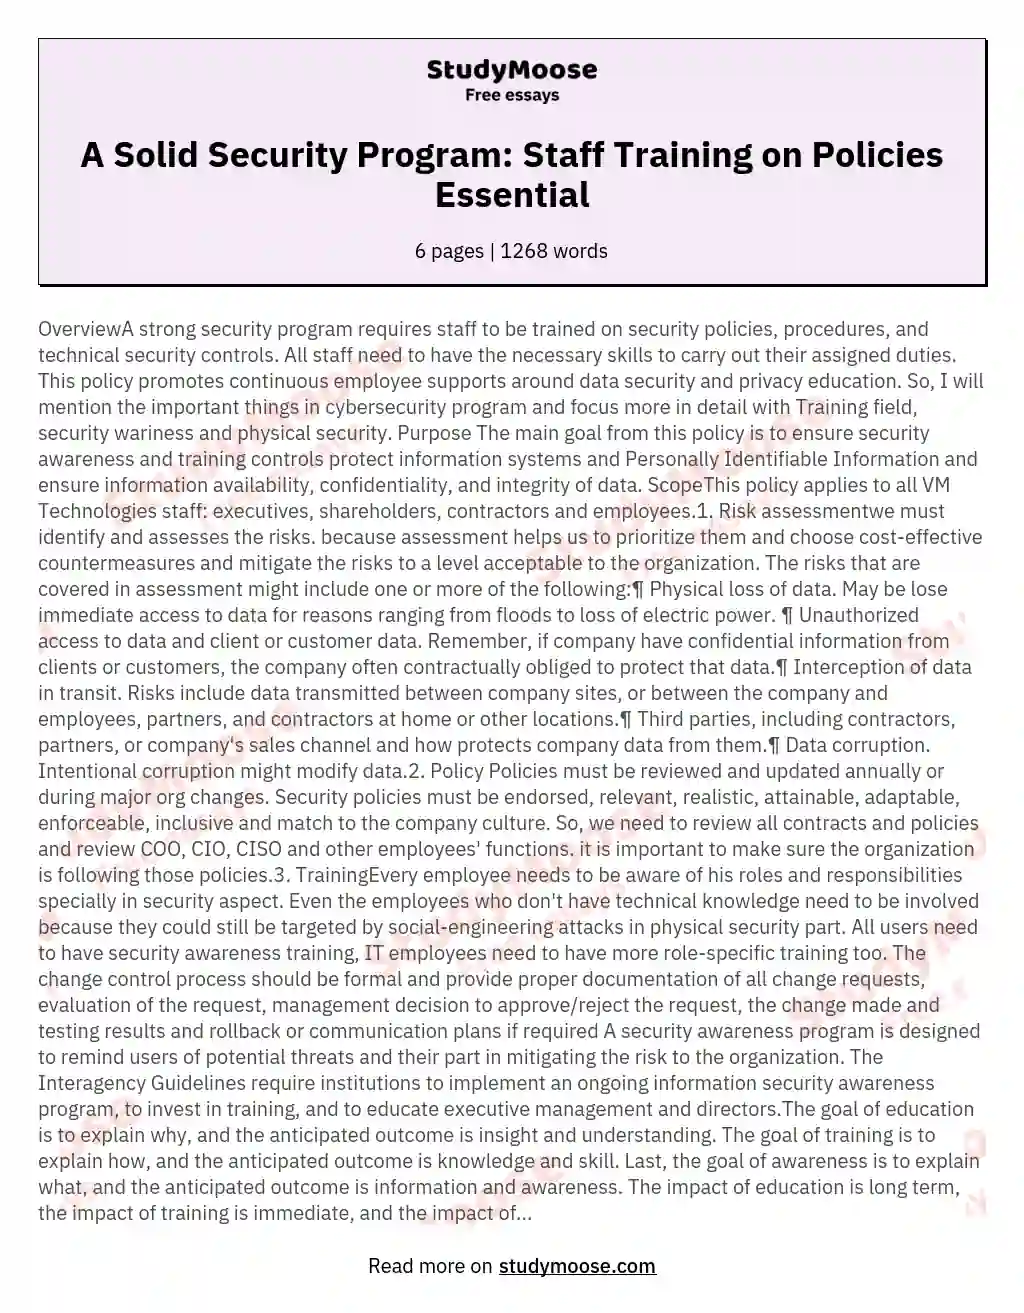 OverviewA strong security program requires staff to be trained on security policies